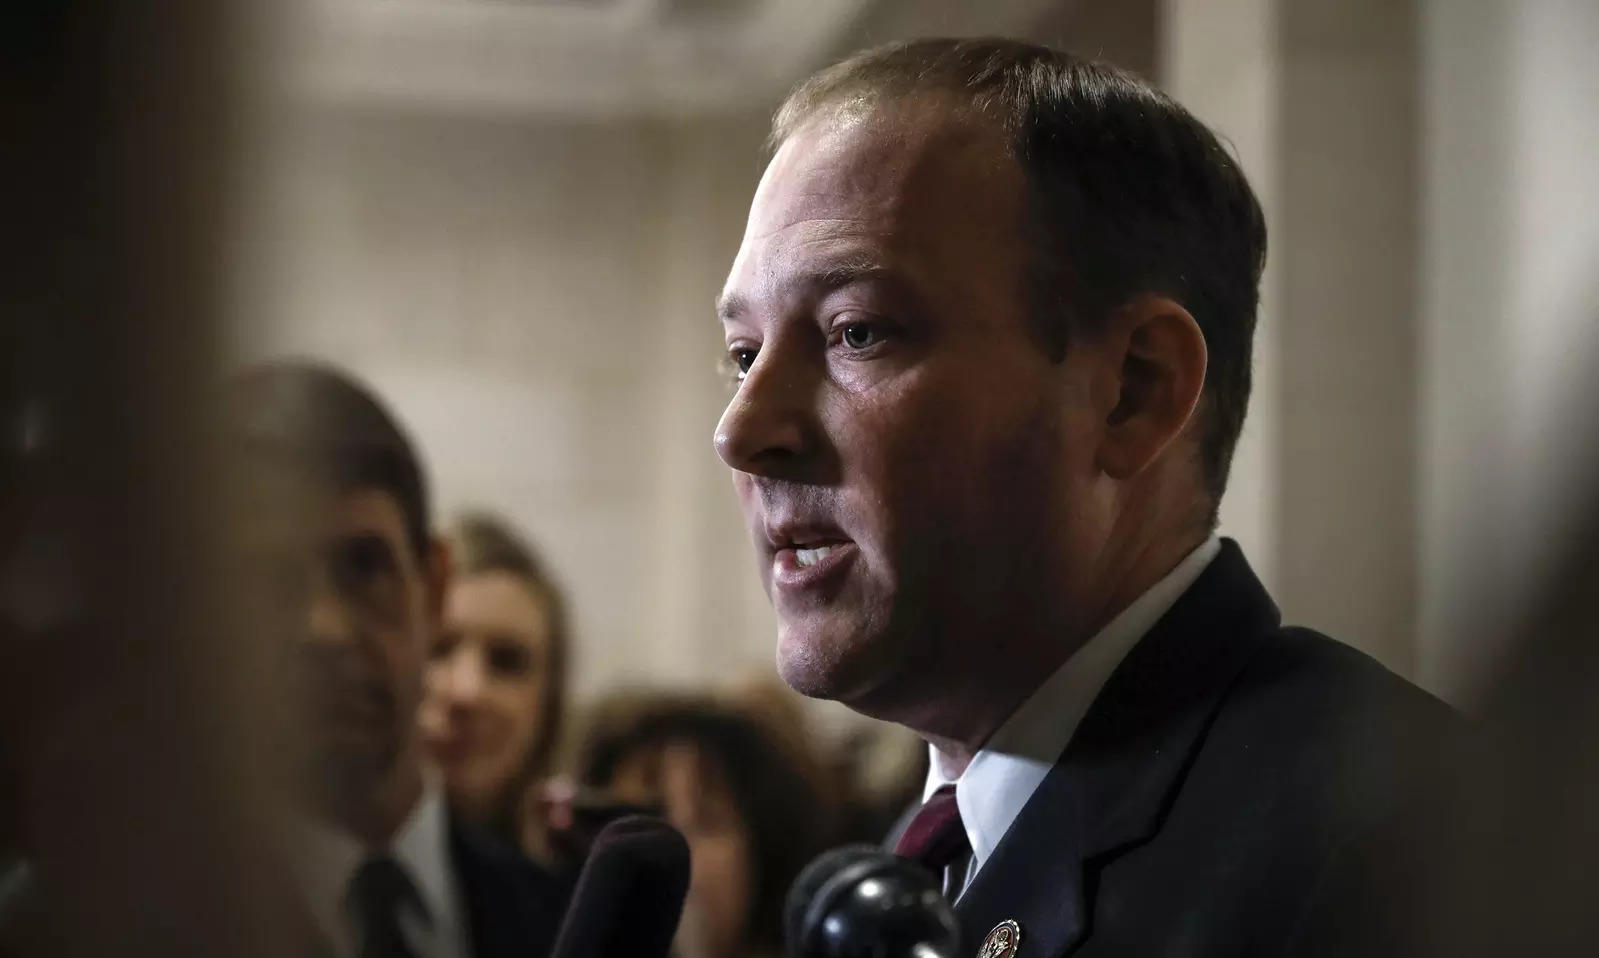 Rep. Zeldin, who's running for New York governor, treated for leukemia; now  in remission - Times of India